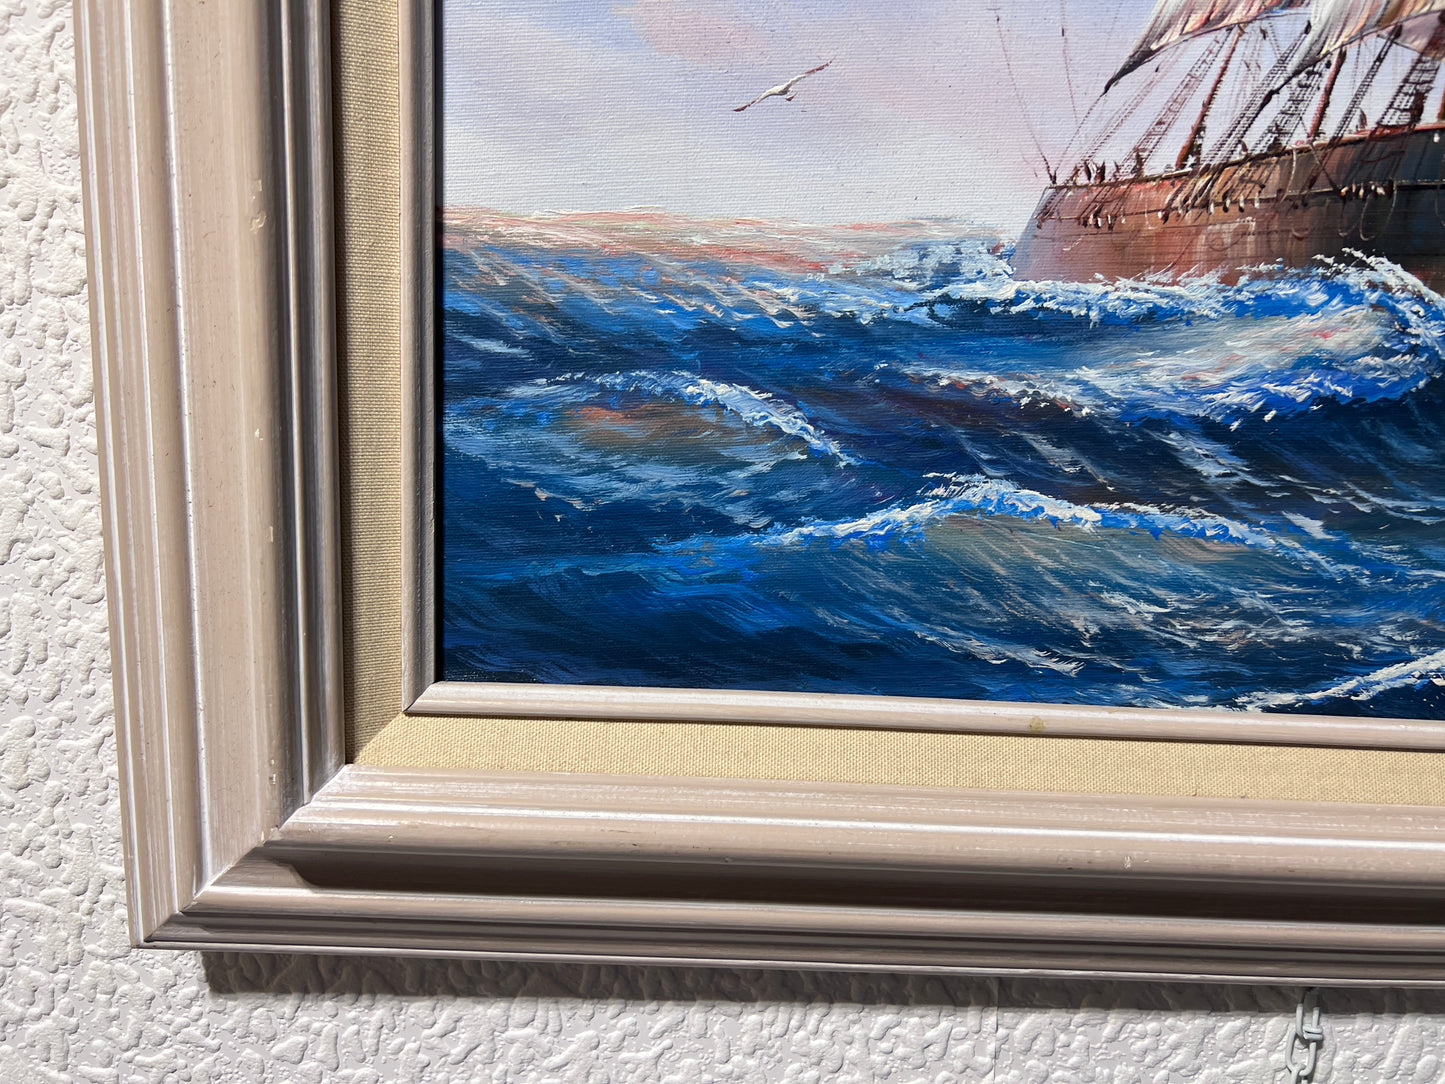 Original Oil painting on canvas, seascape, Sailing Ship, signed Taylor